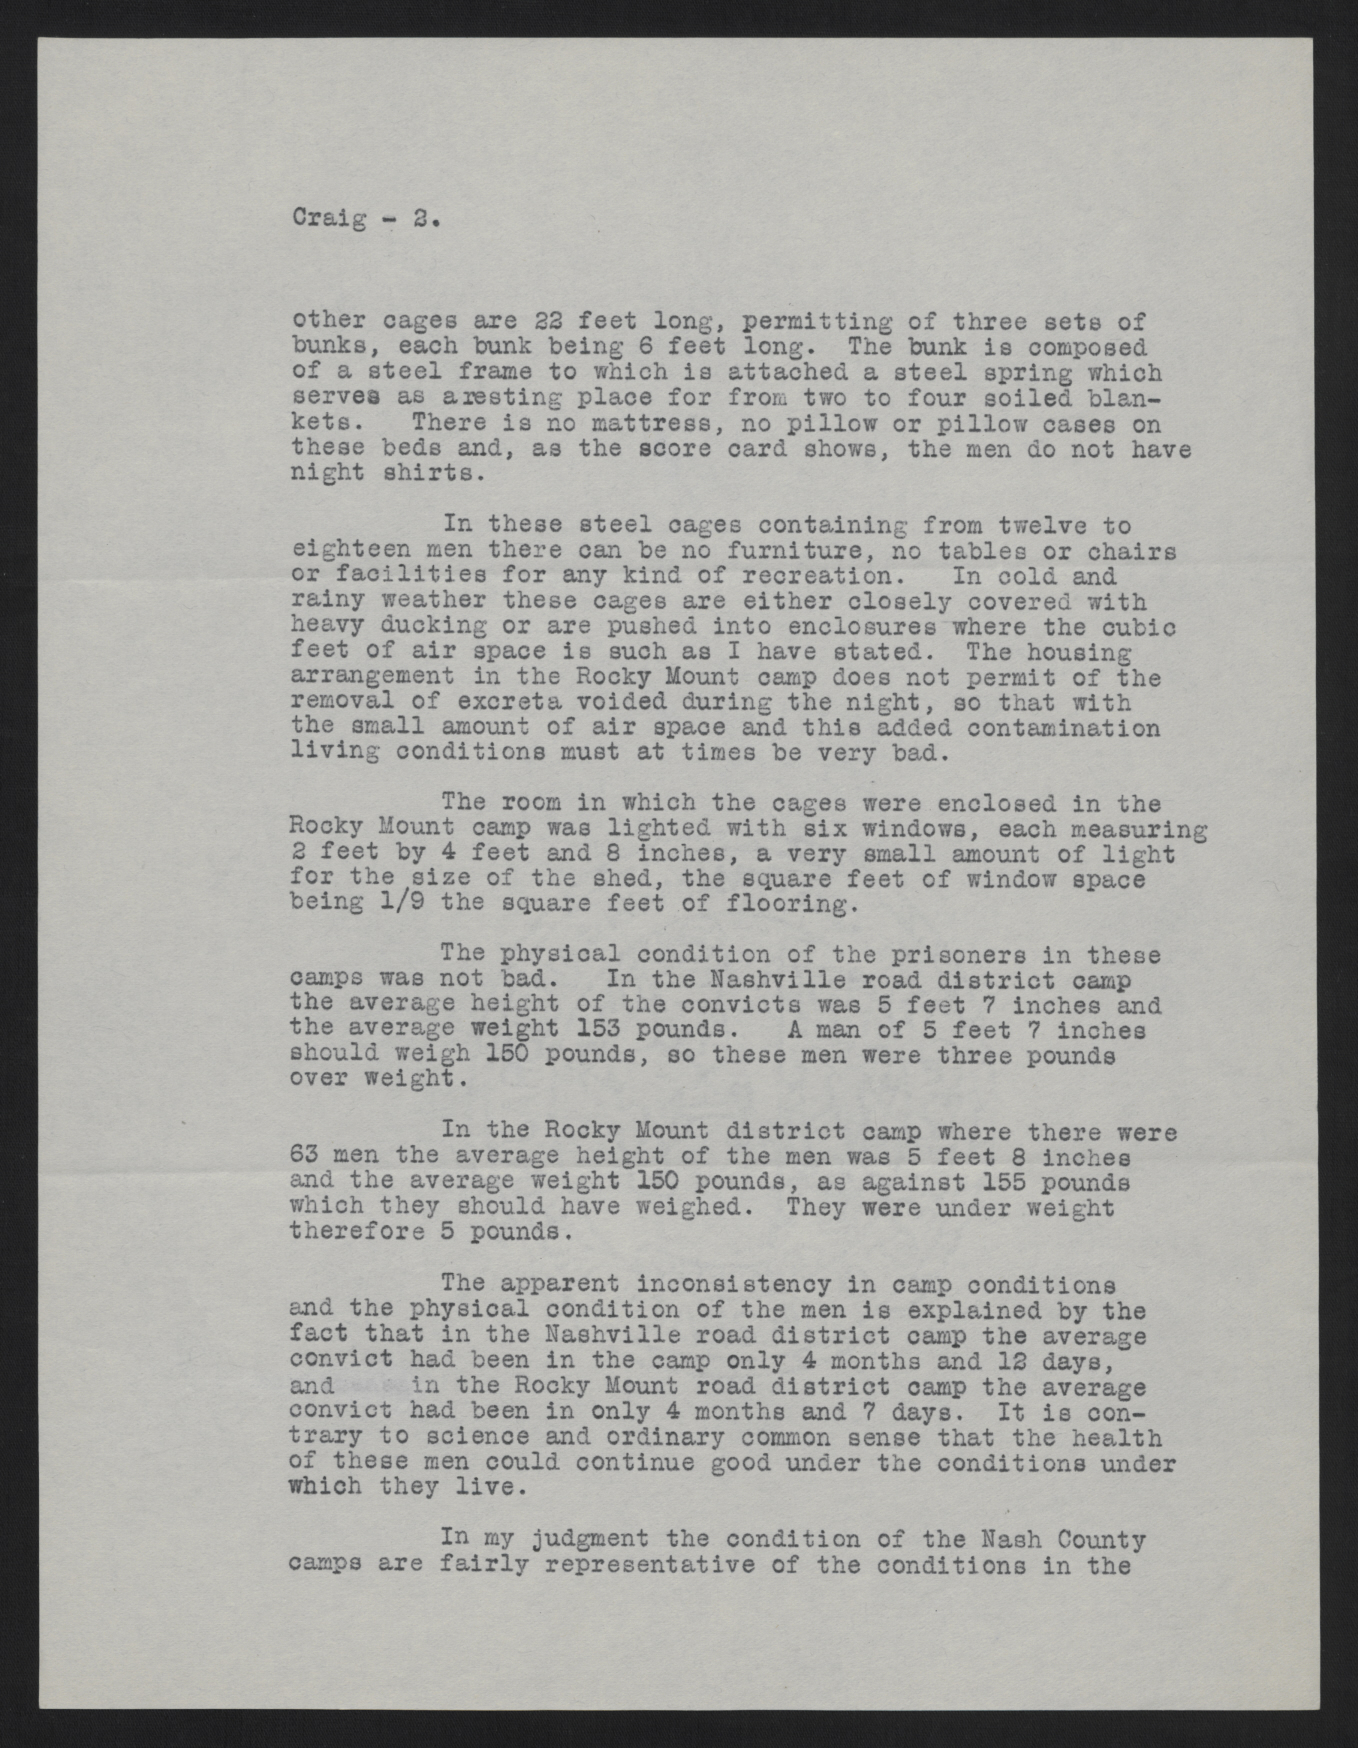 Letter from Rankin to Craig, May 5, 1915, page 2